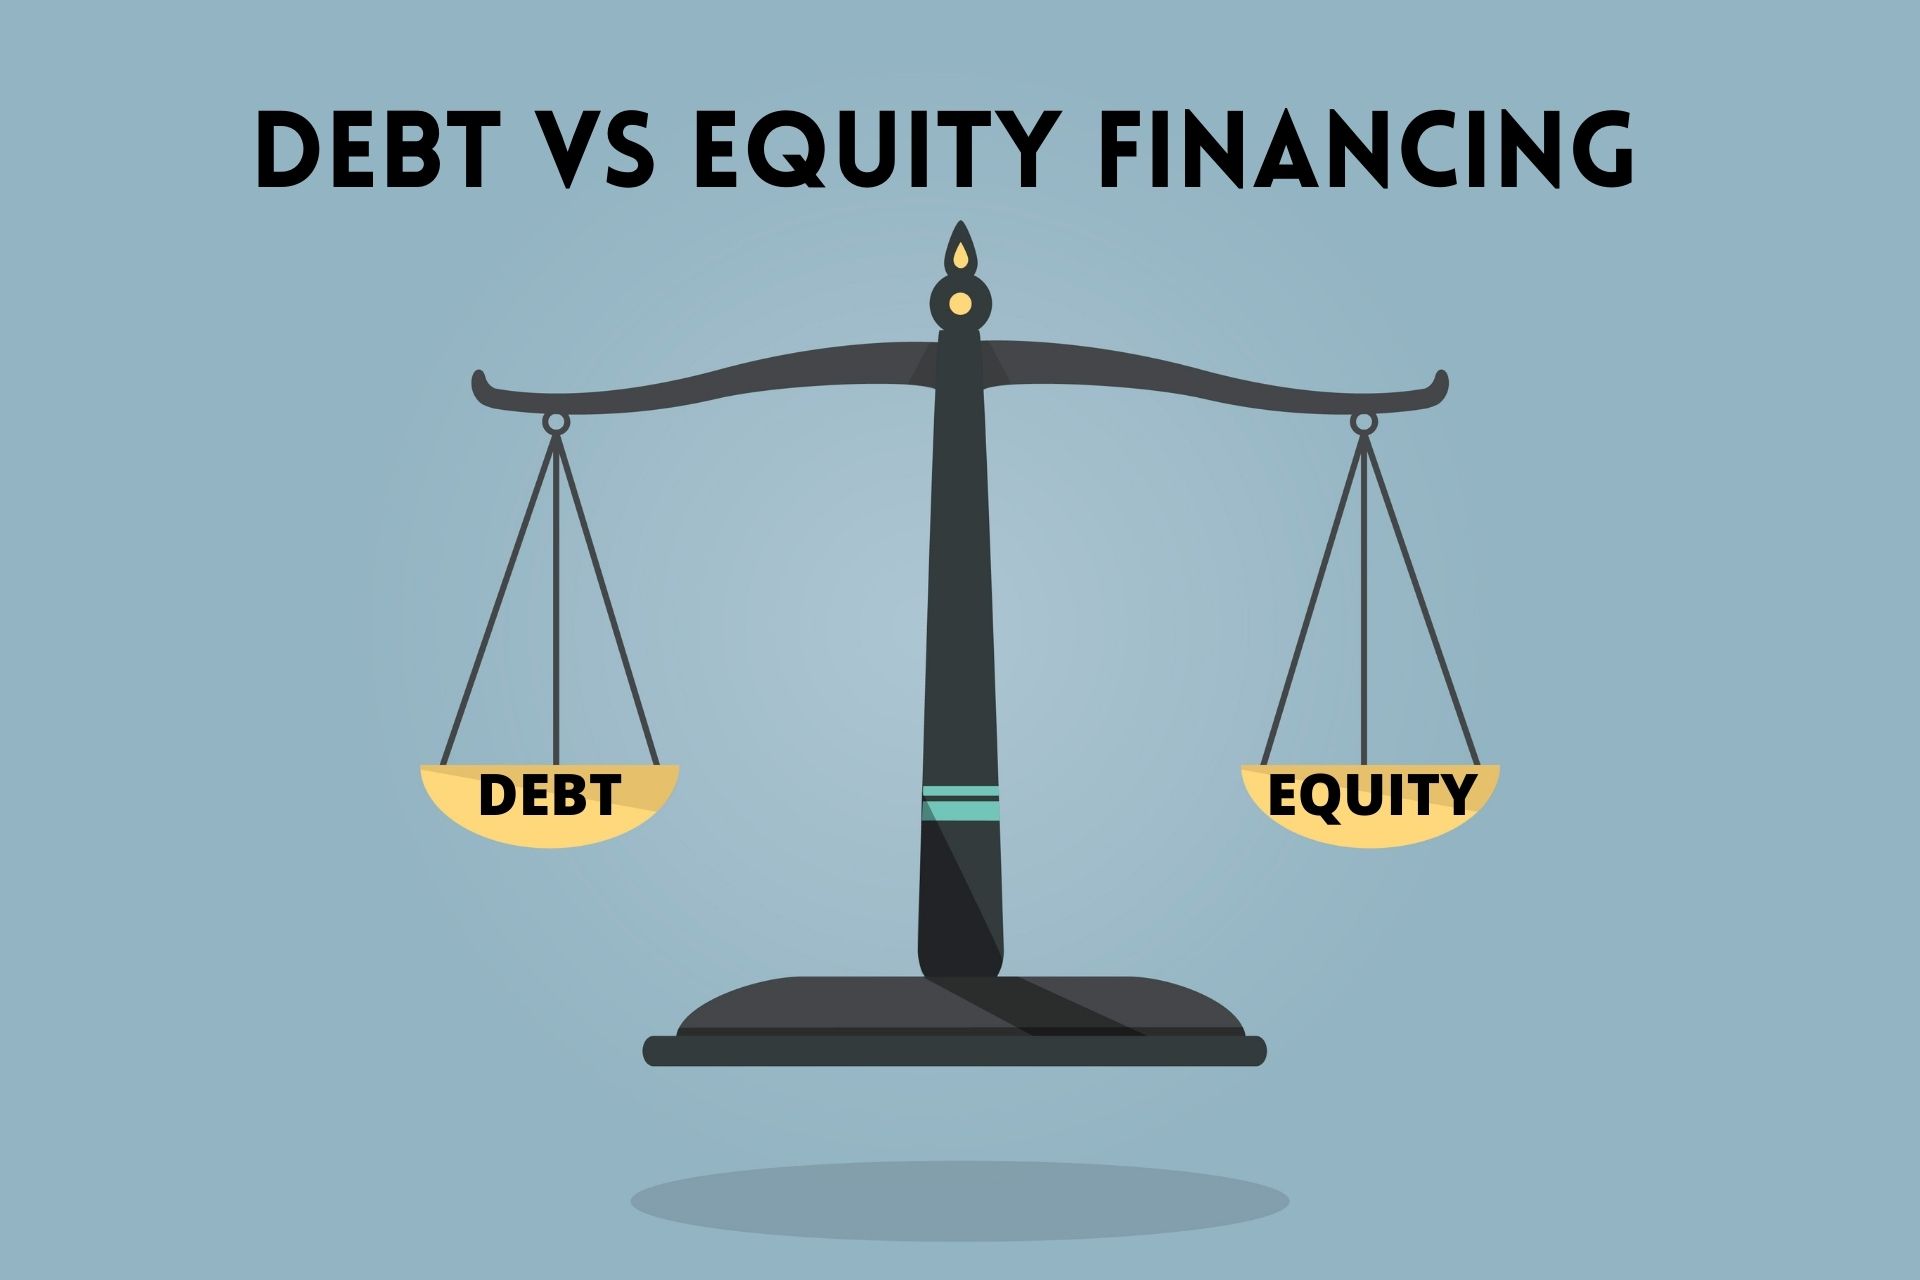 Which Is An Advantage Of Equity Financing Over Debt Financing?